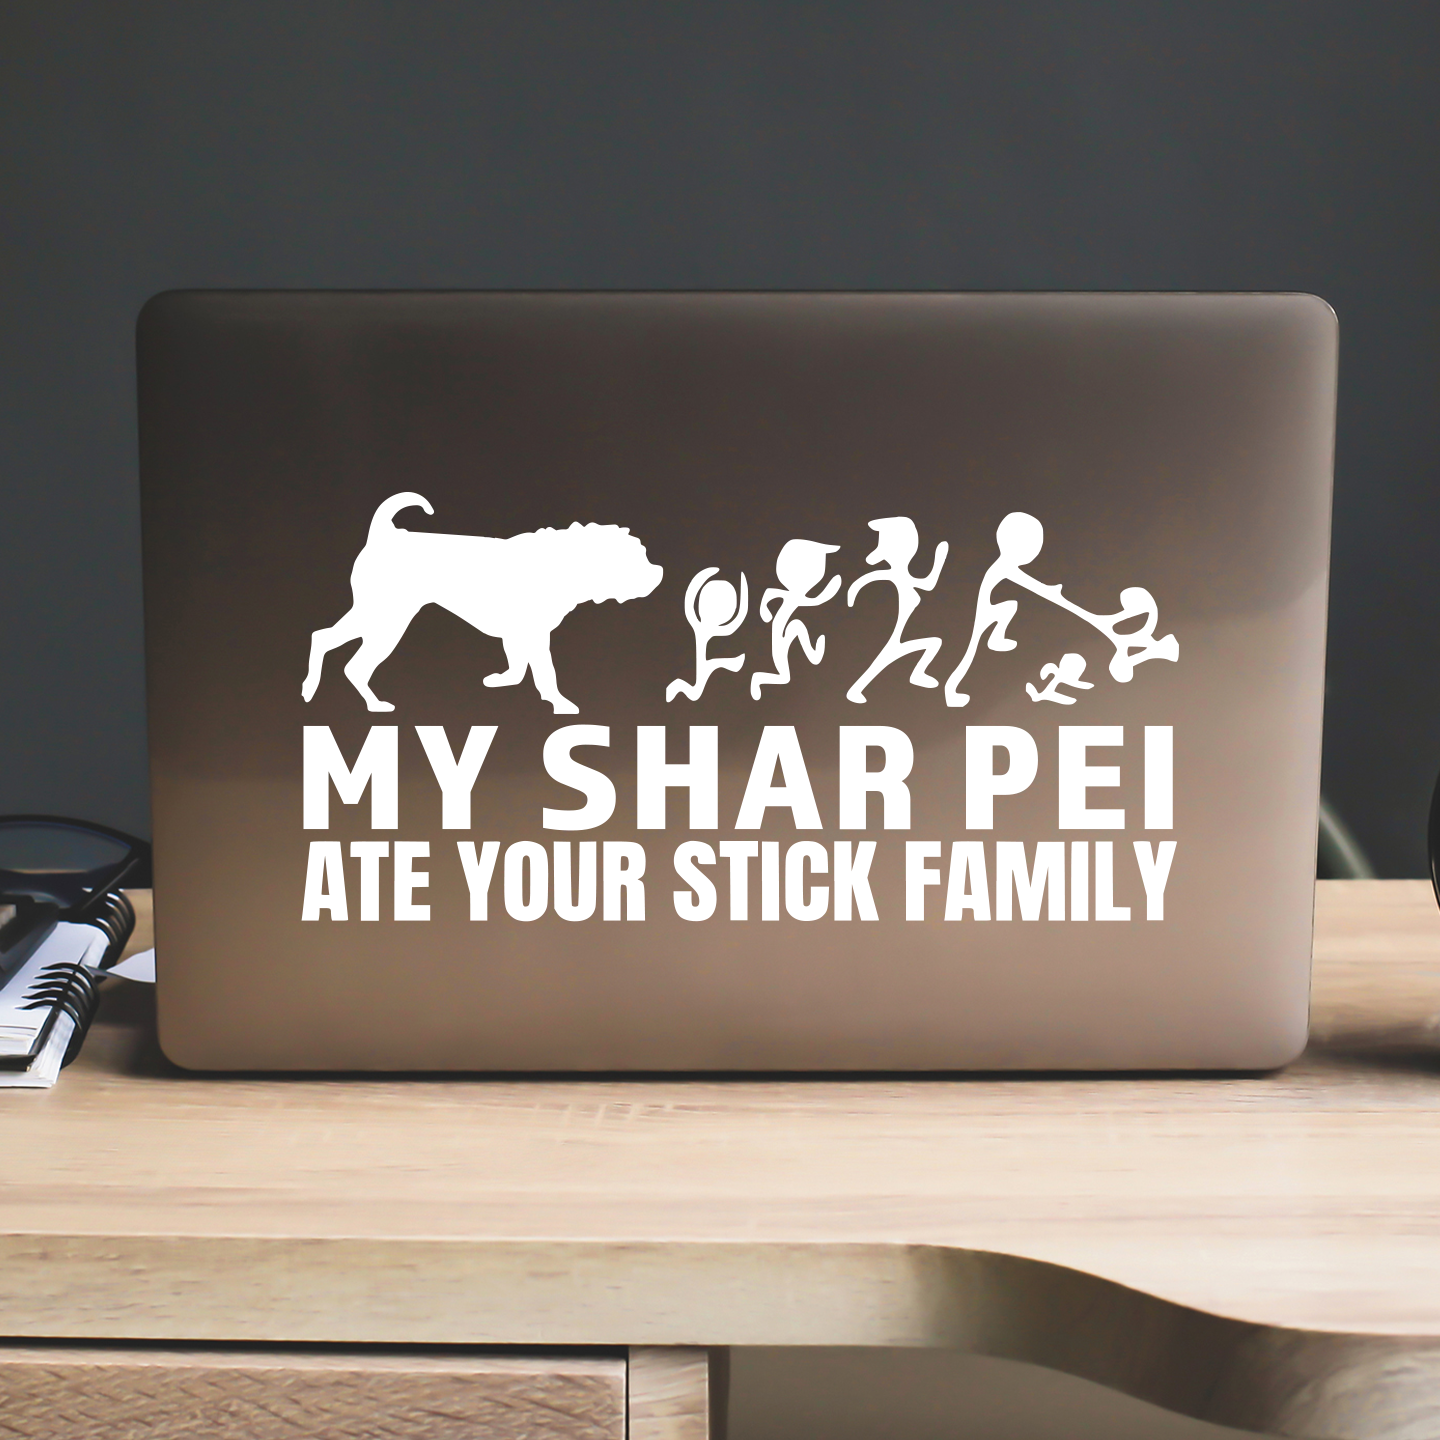 My Shar Pei Ate Your Stick Family Sticker